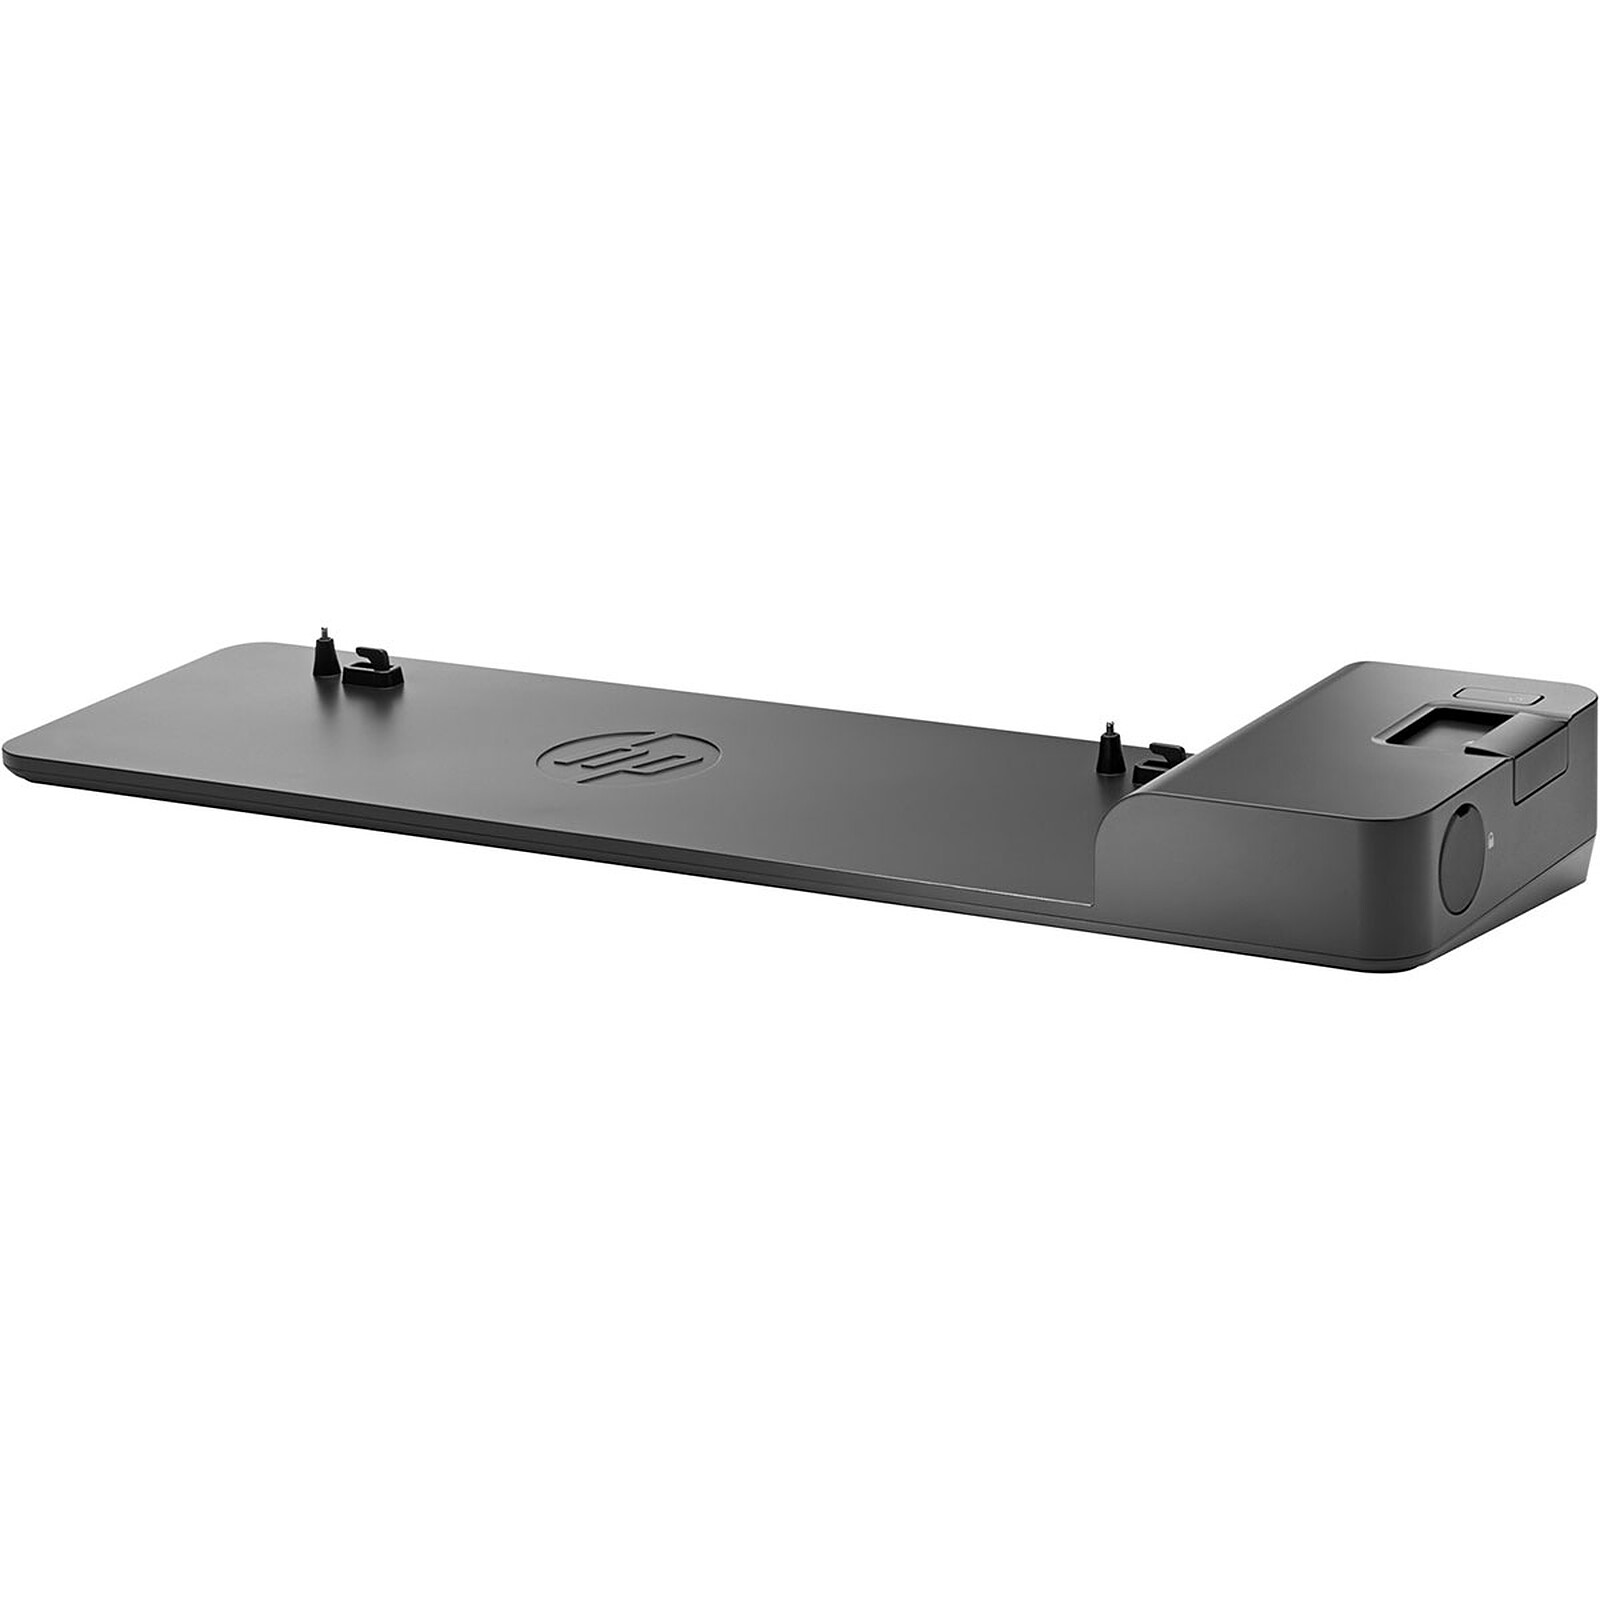 HP Ultra Slim Docking Station (D9Y32AA) - Station d'accueil PC portable -  Garantie 3 ans LDLC